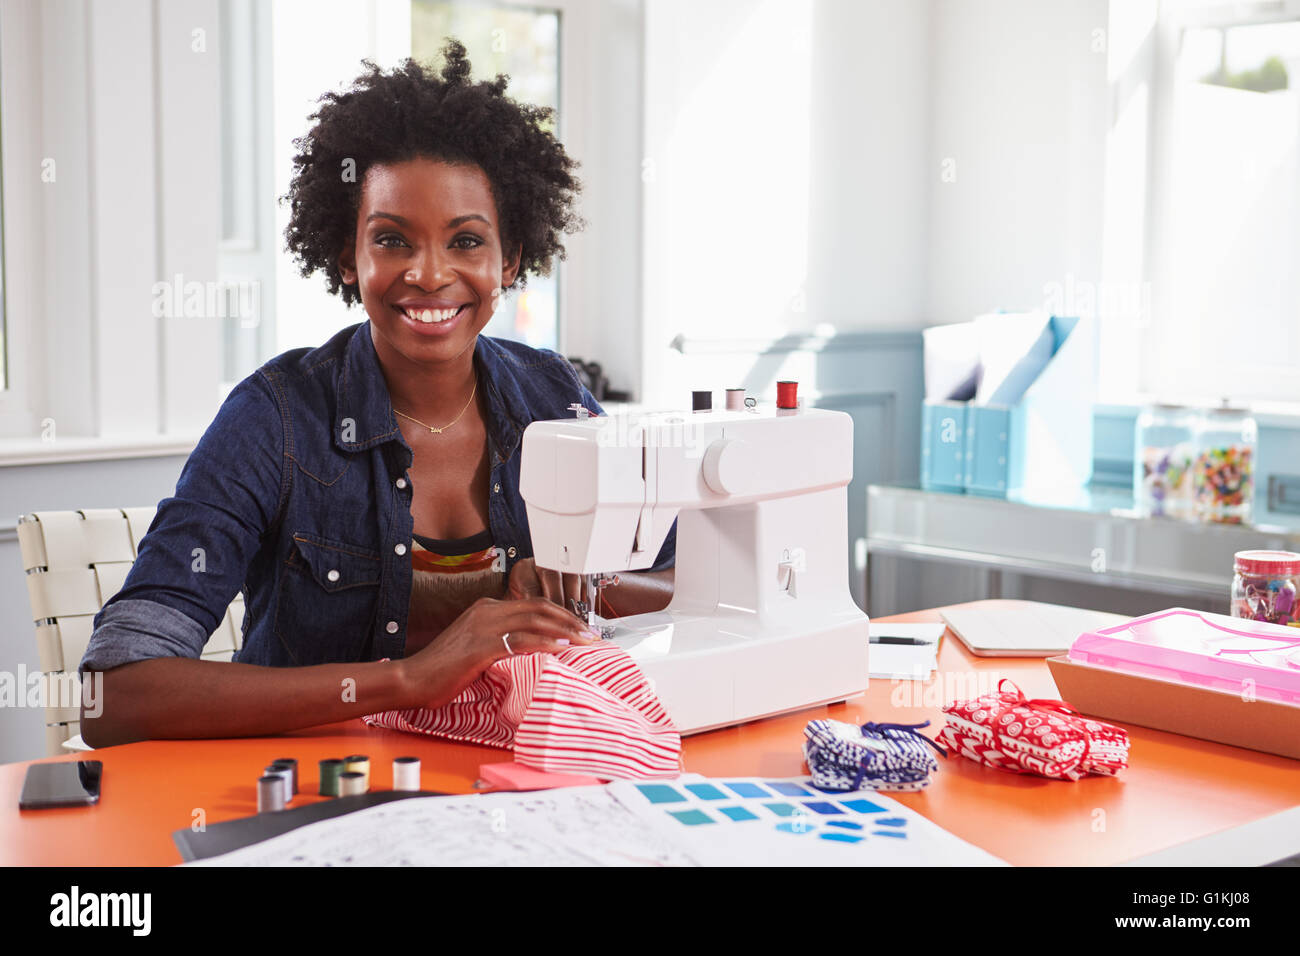 Young black woman using a sewing machine looking to camera Stock Photo